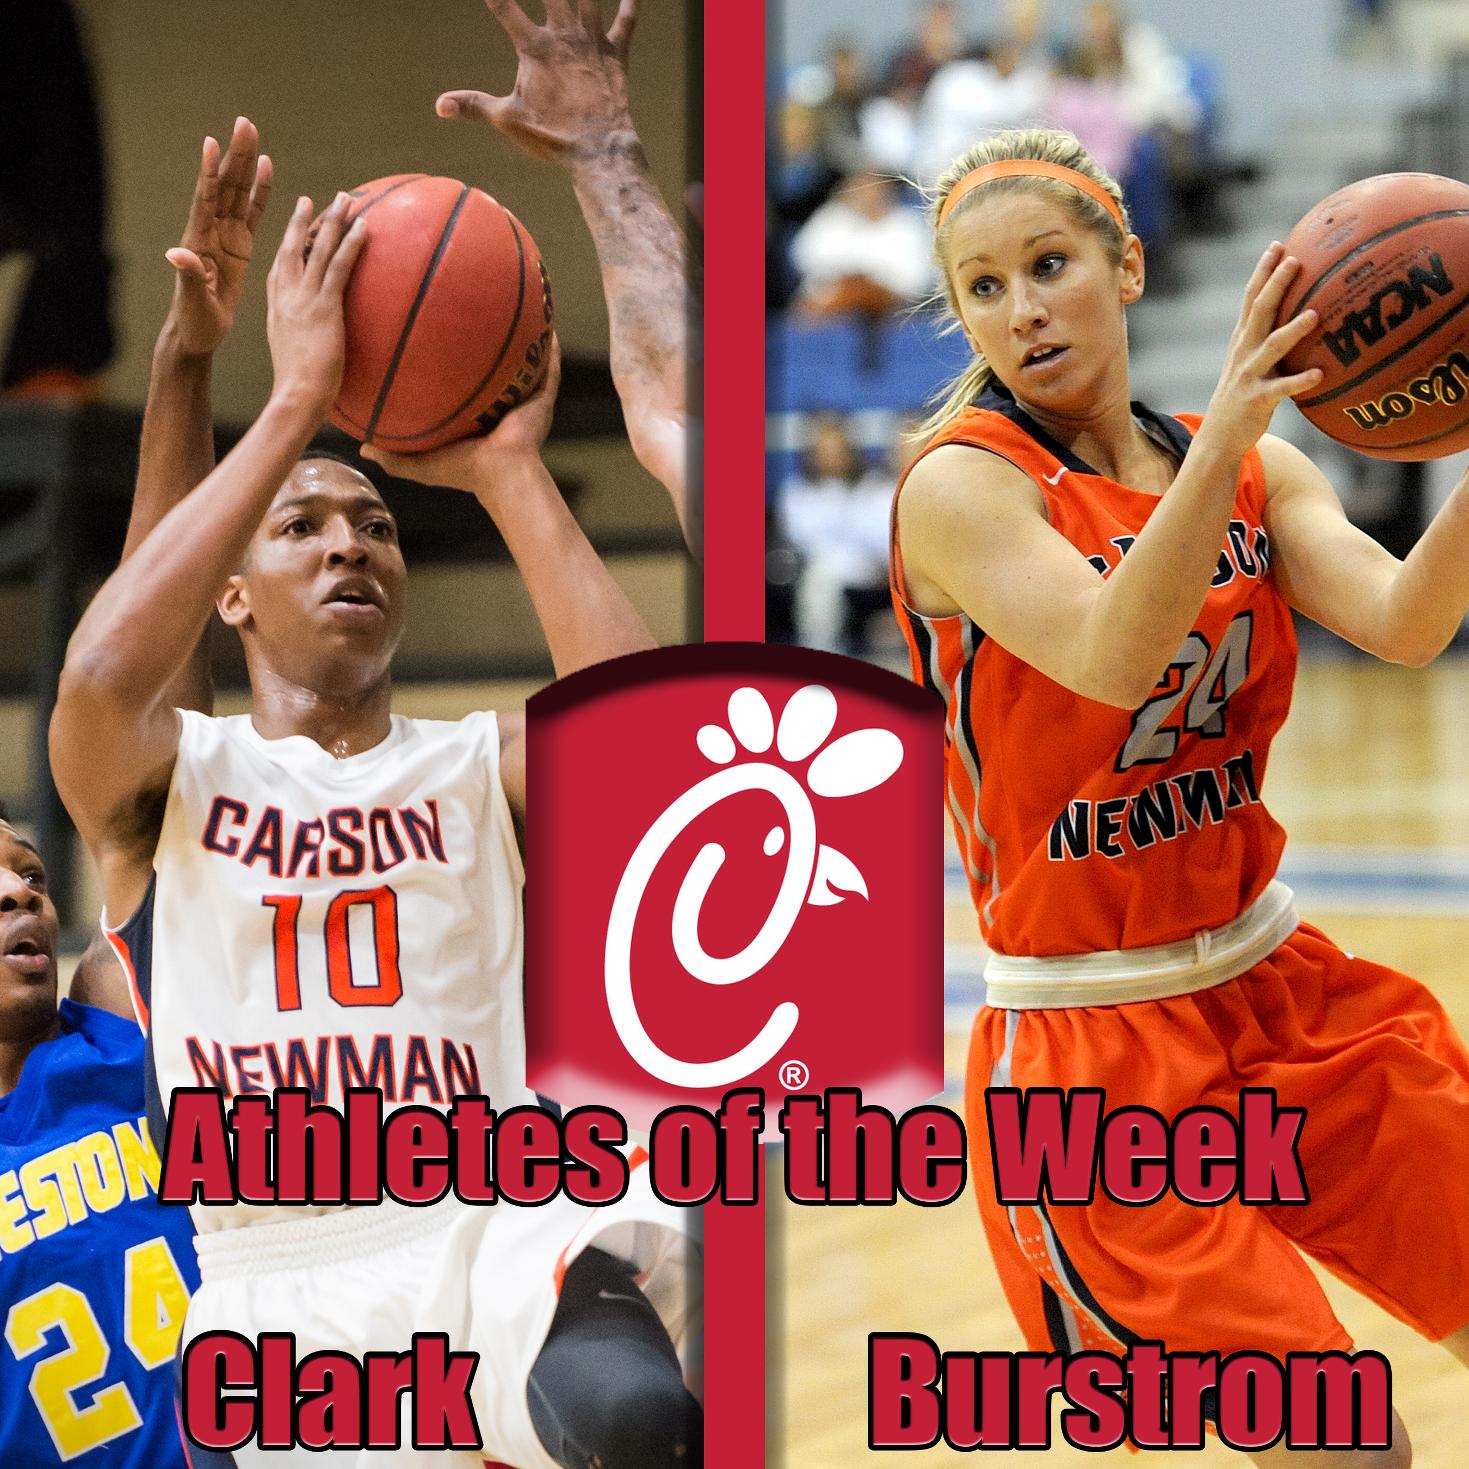 Clark, Burstrom net Chick-Fil-A Athlete of the Week honors